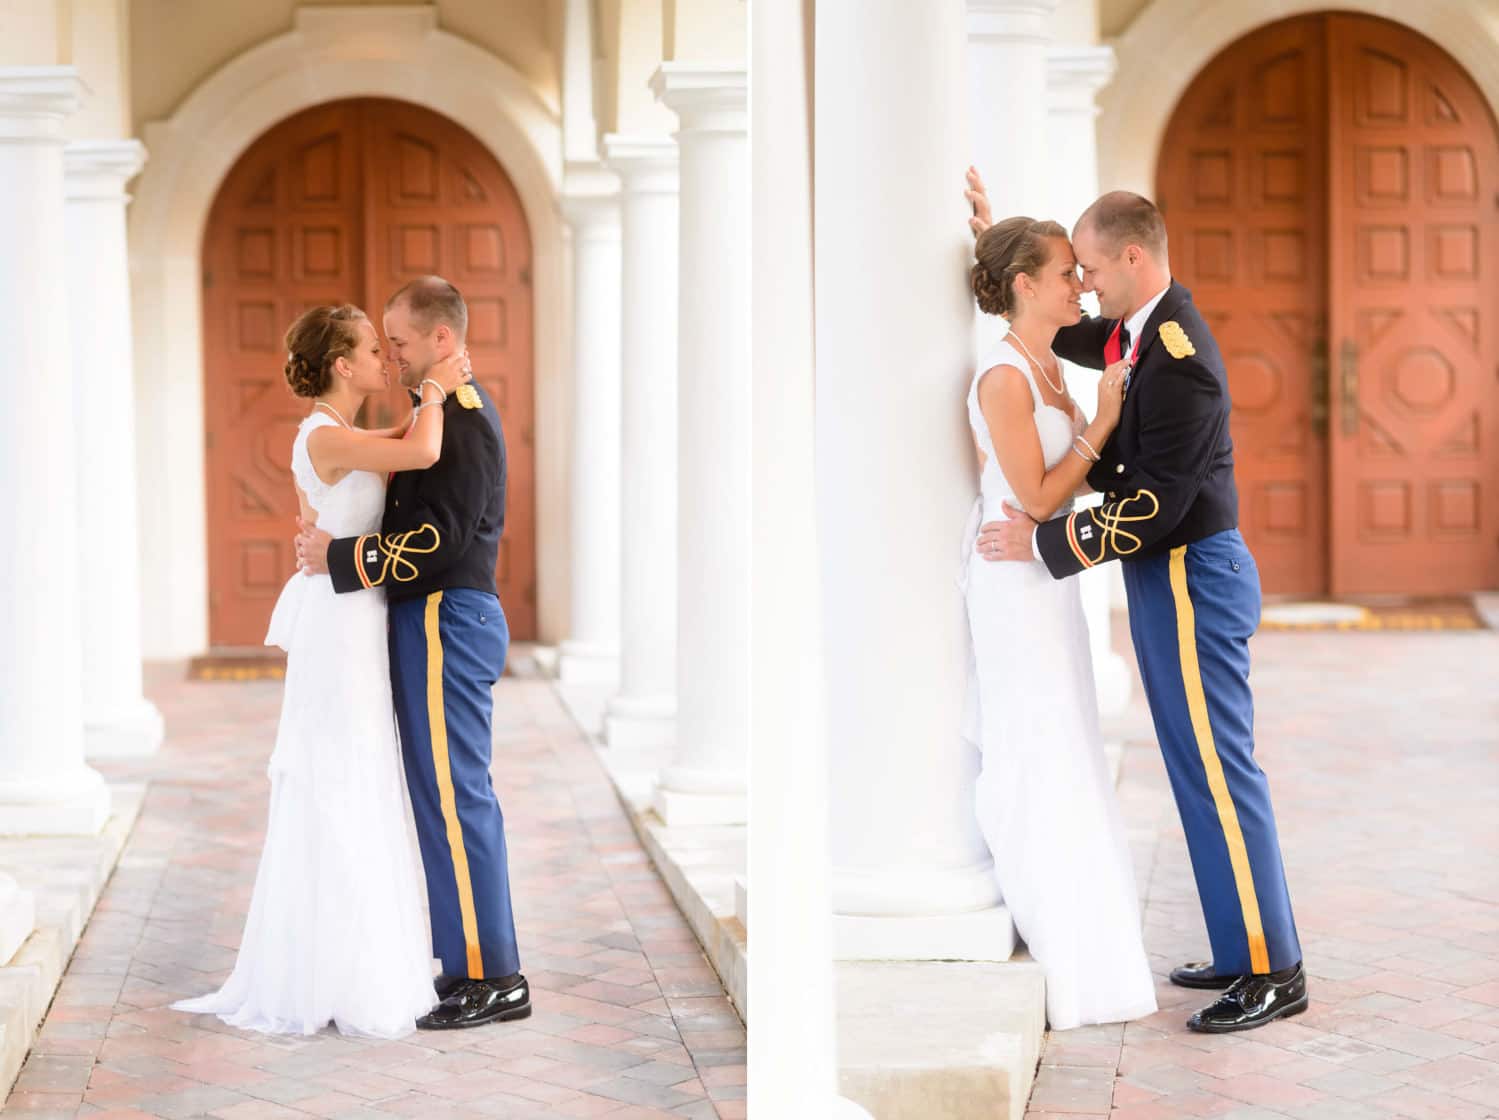 Kiss in front of the Ocean Club doors by the columns